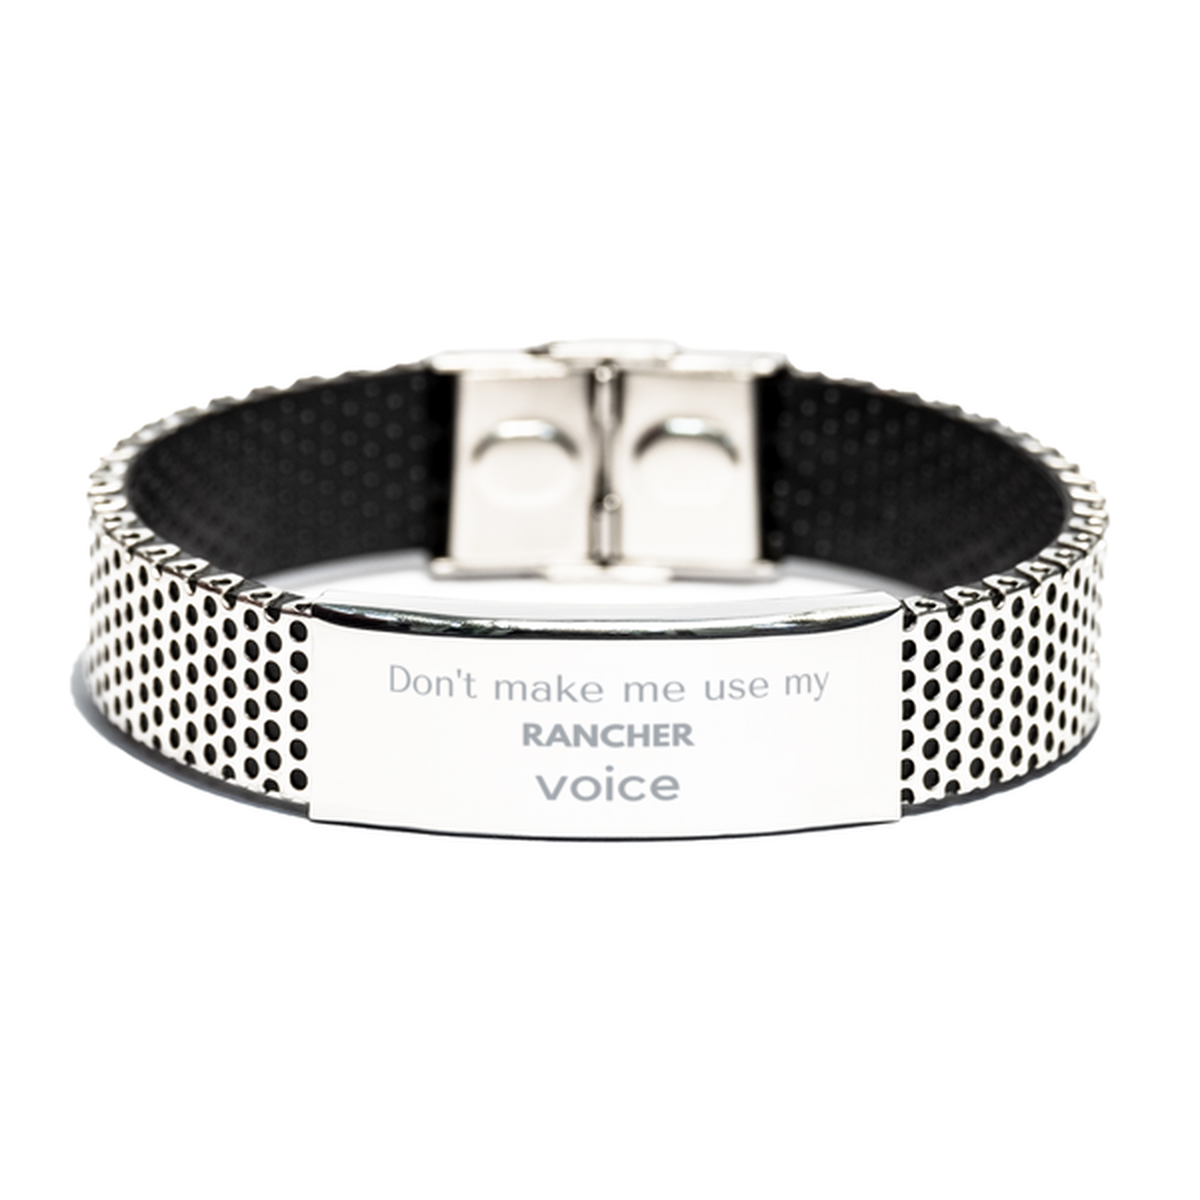 Don't make me use my Rancher voice, Sarcasm Rancher Gifts, Christmas Rancher Stainless Steel Bracelet Birthday Unique Gifts For Rancher Coworkers, Men, Women, Colleague, Friends